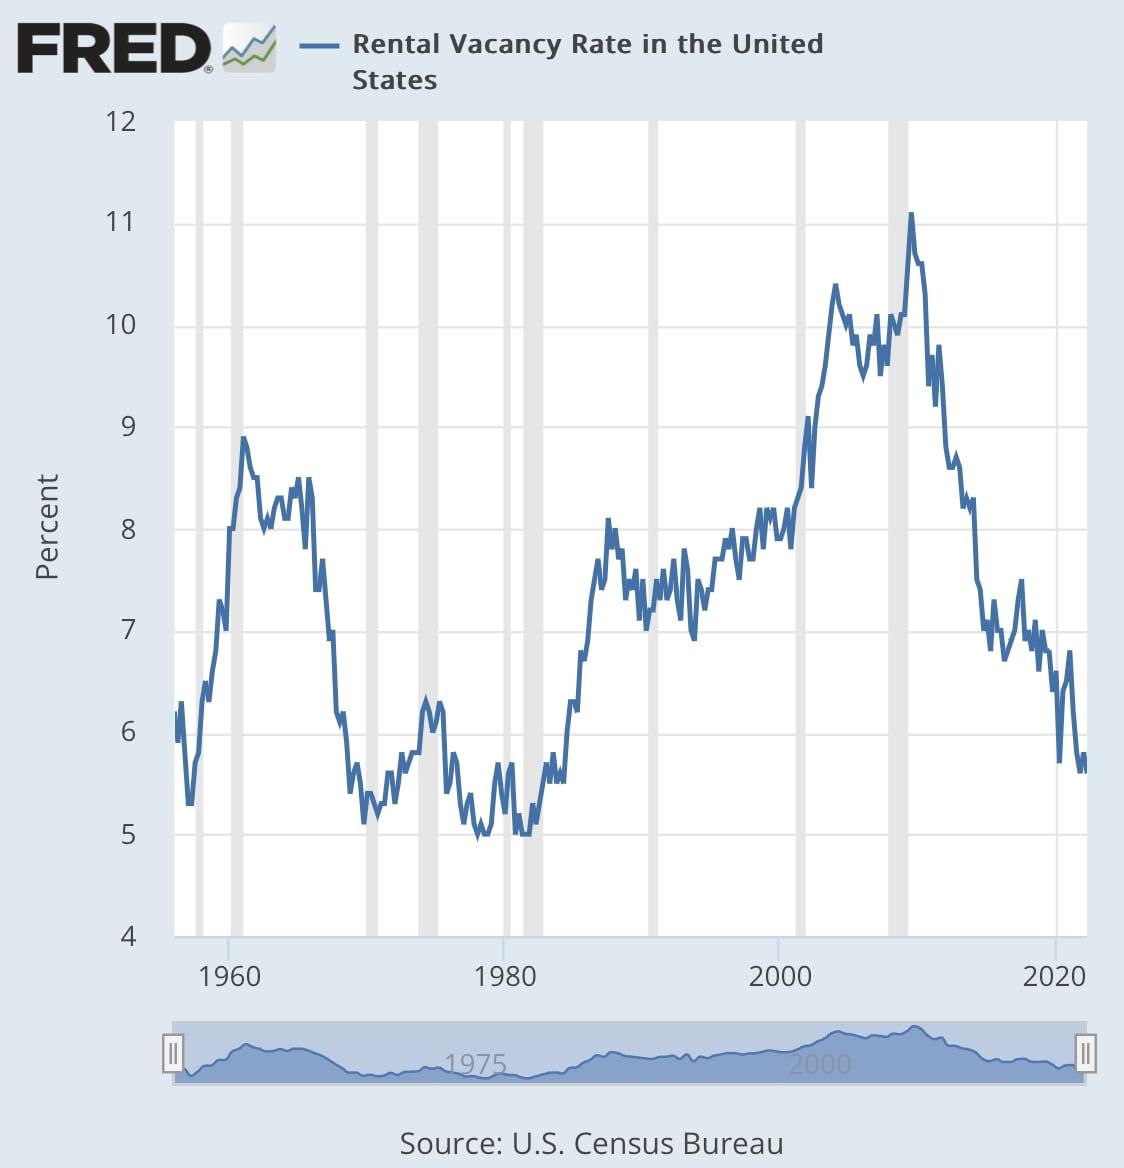 Chart of Rental Vacancy Rates in the United States